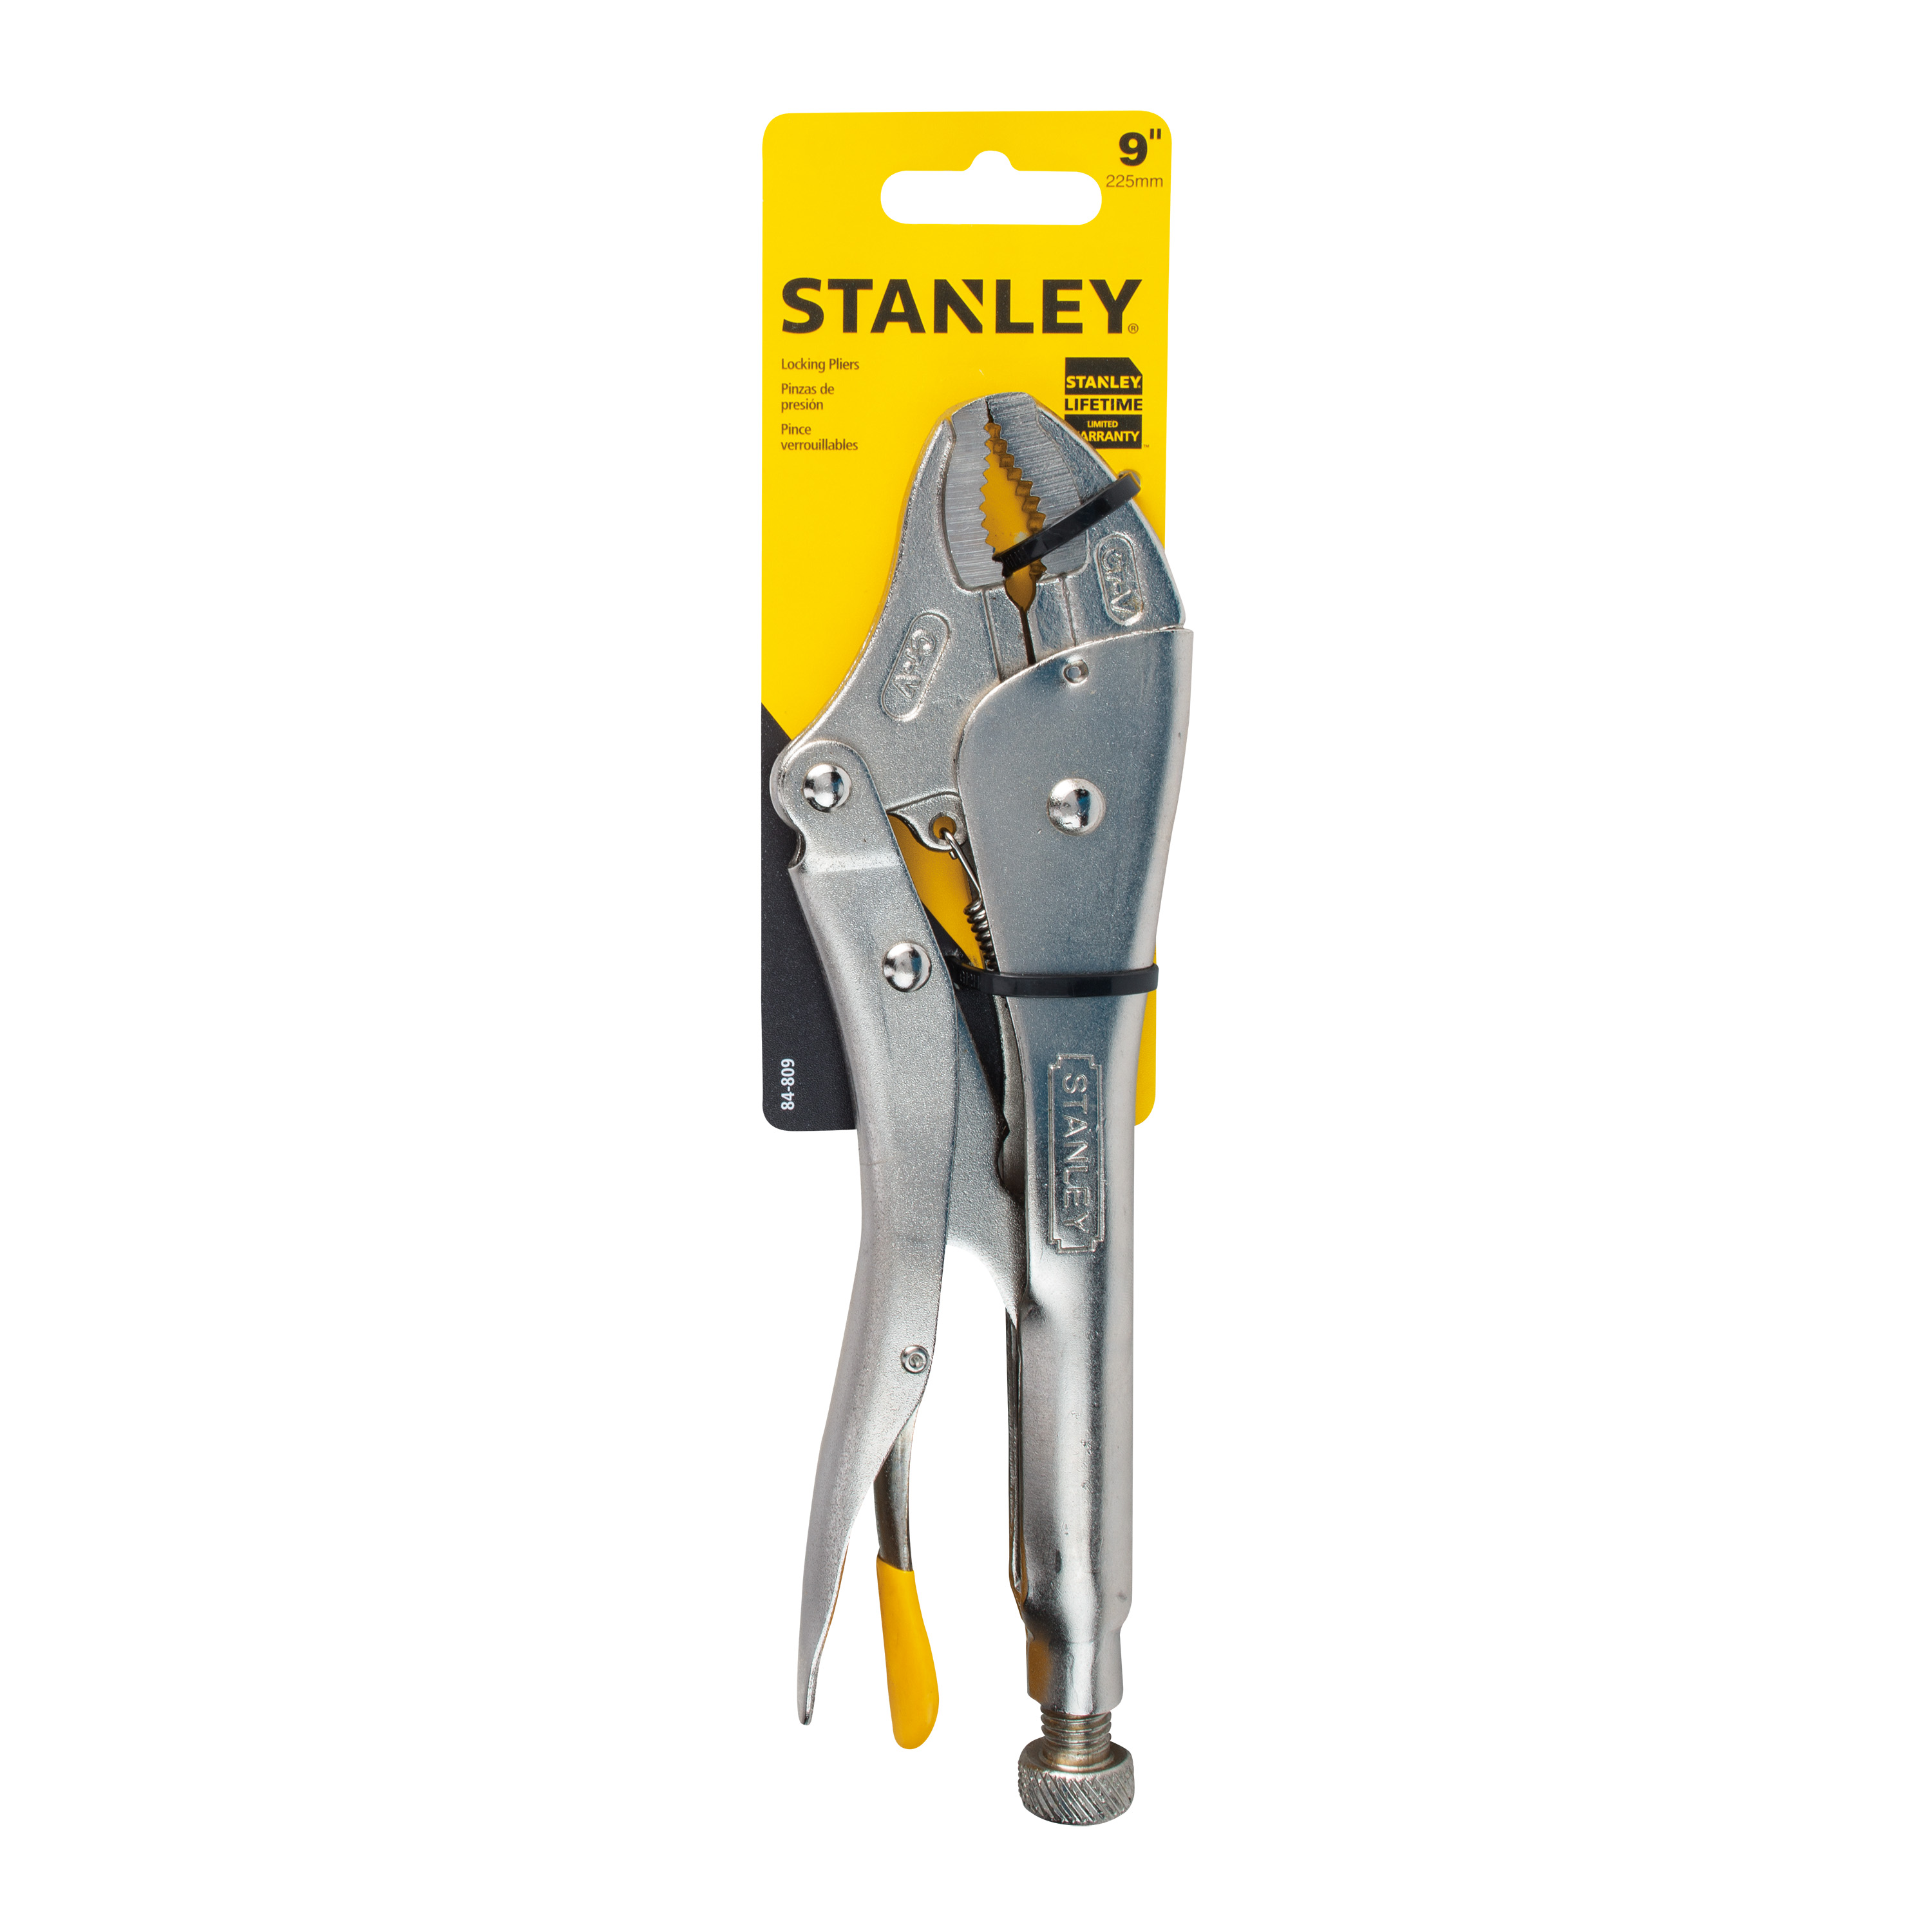 STANLEY 84-809 9-Inch Locking Pliers - image 1 of 4